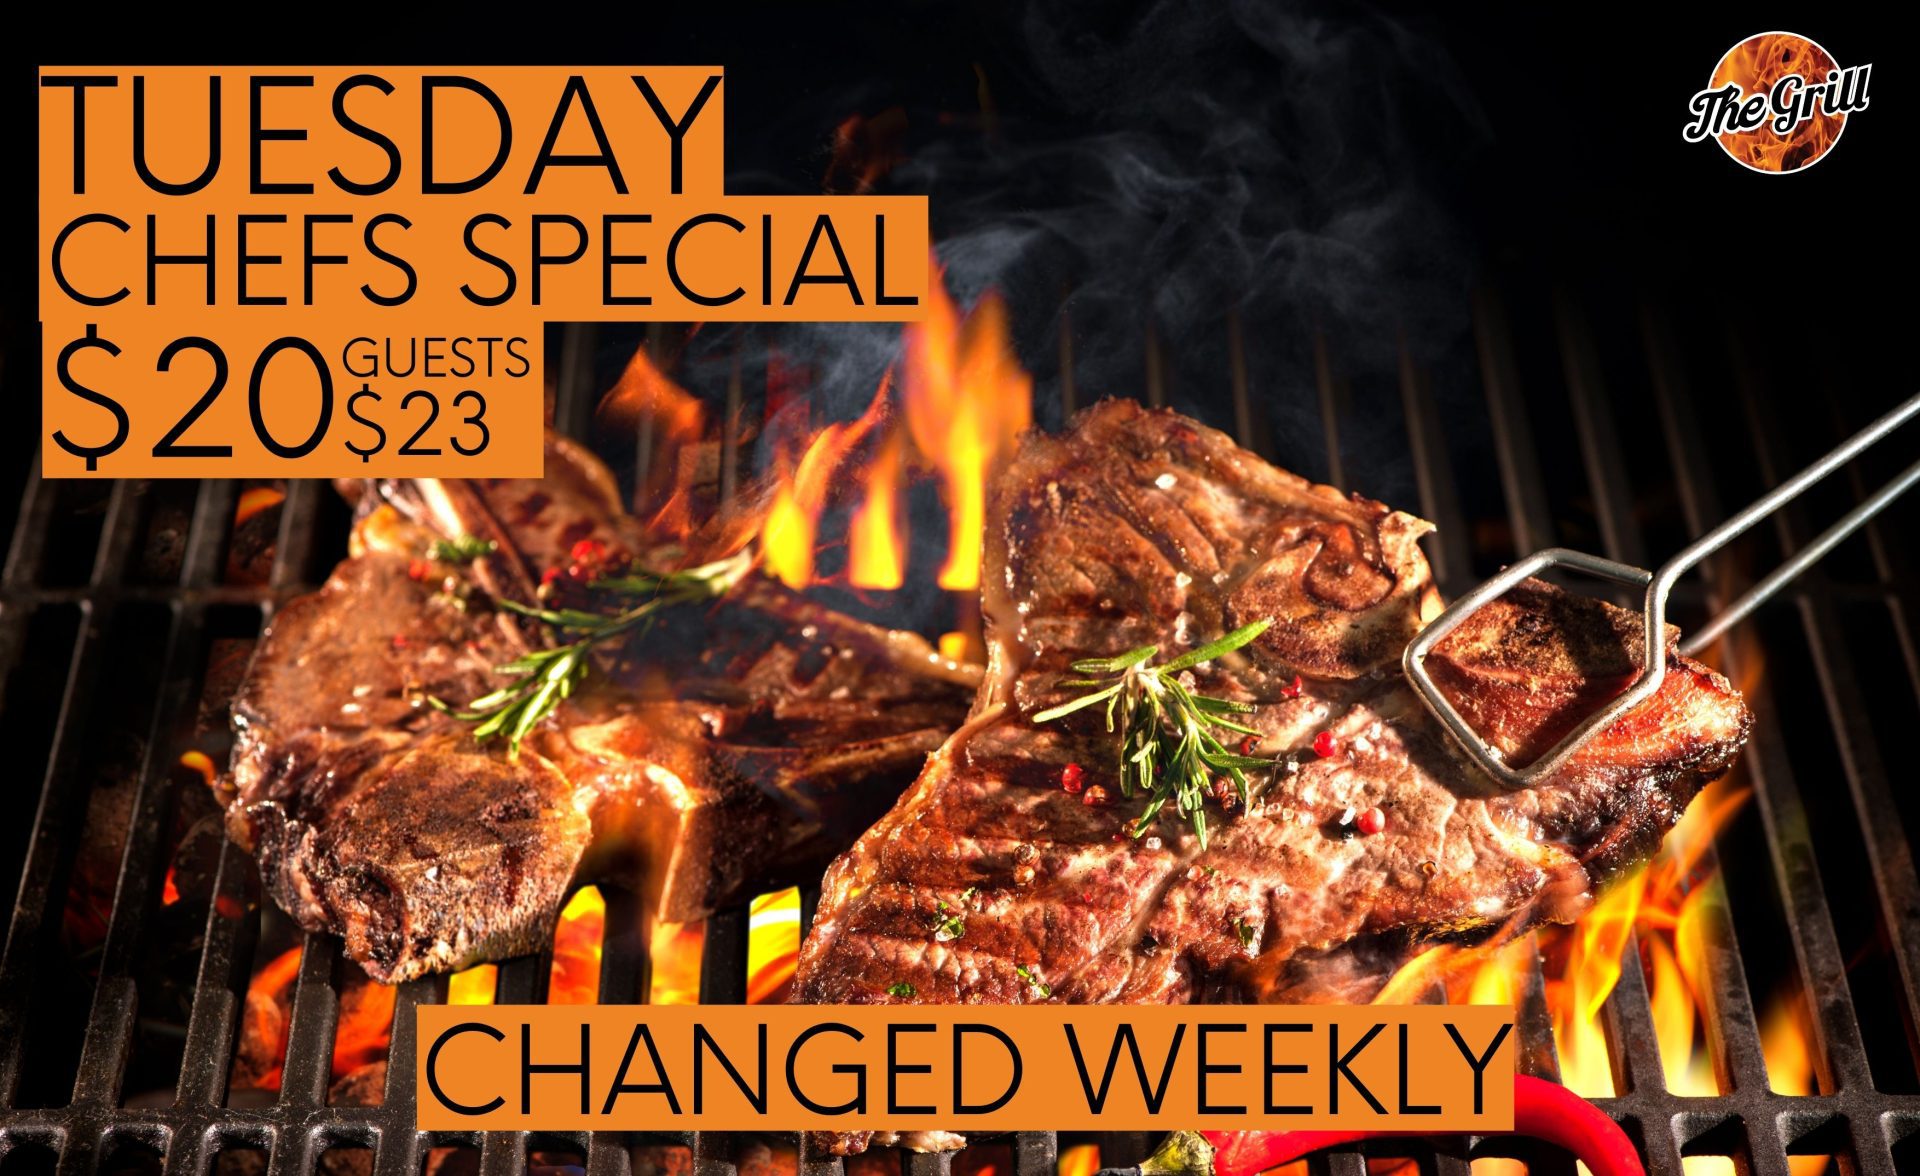 Tuesday Chef Special